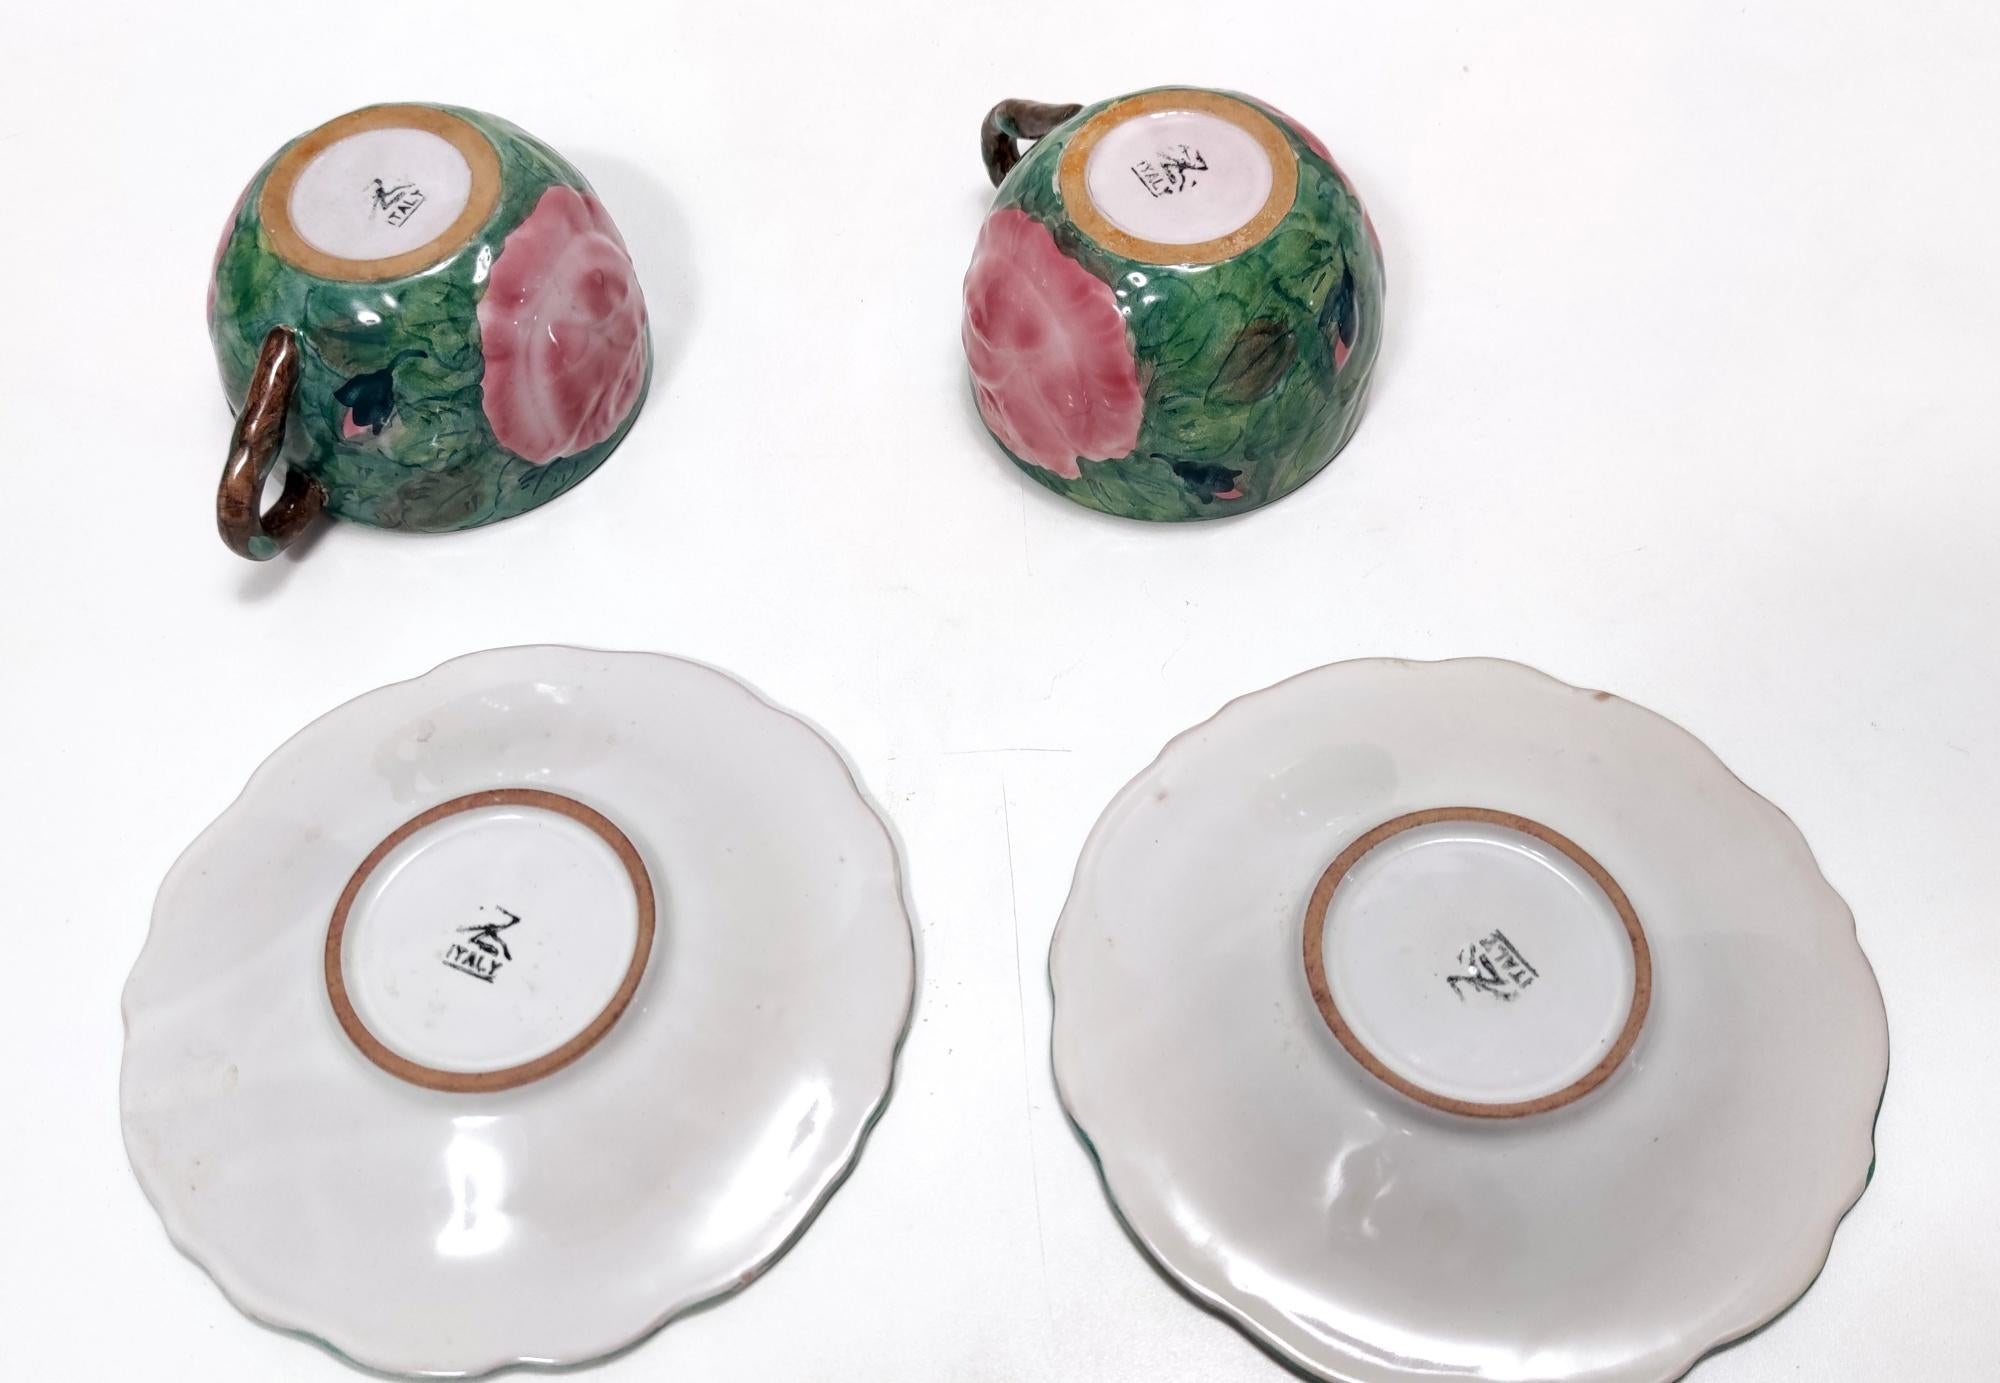 Pair of Green Earthenware Tea /Coffee Cups with Floral Motifs by Zaccagnini For Sale 10